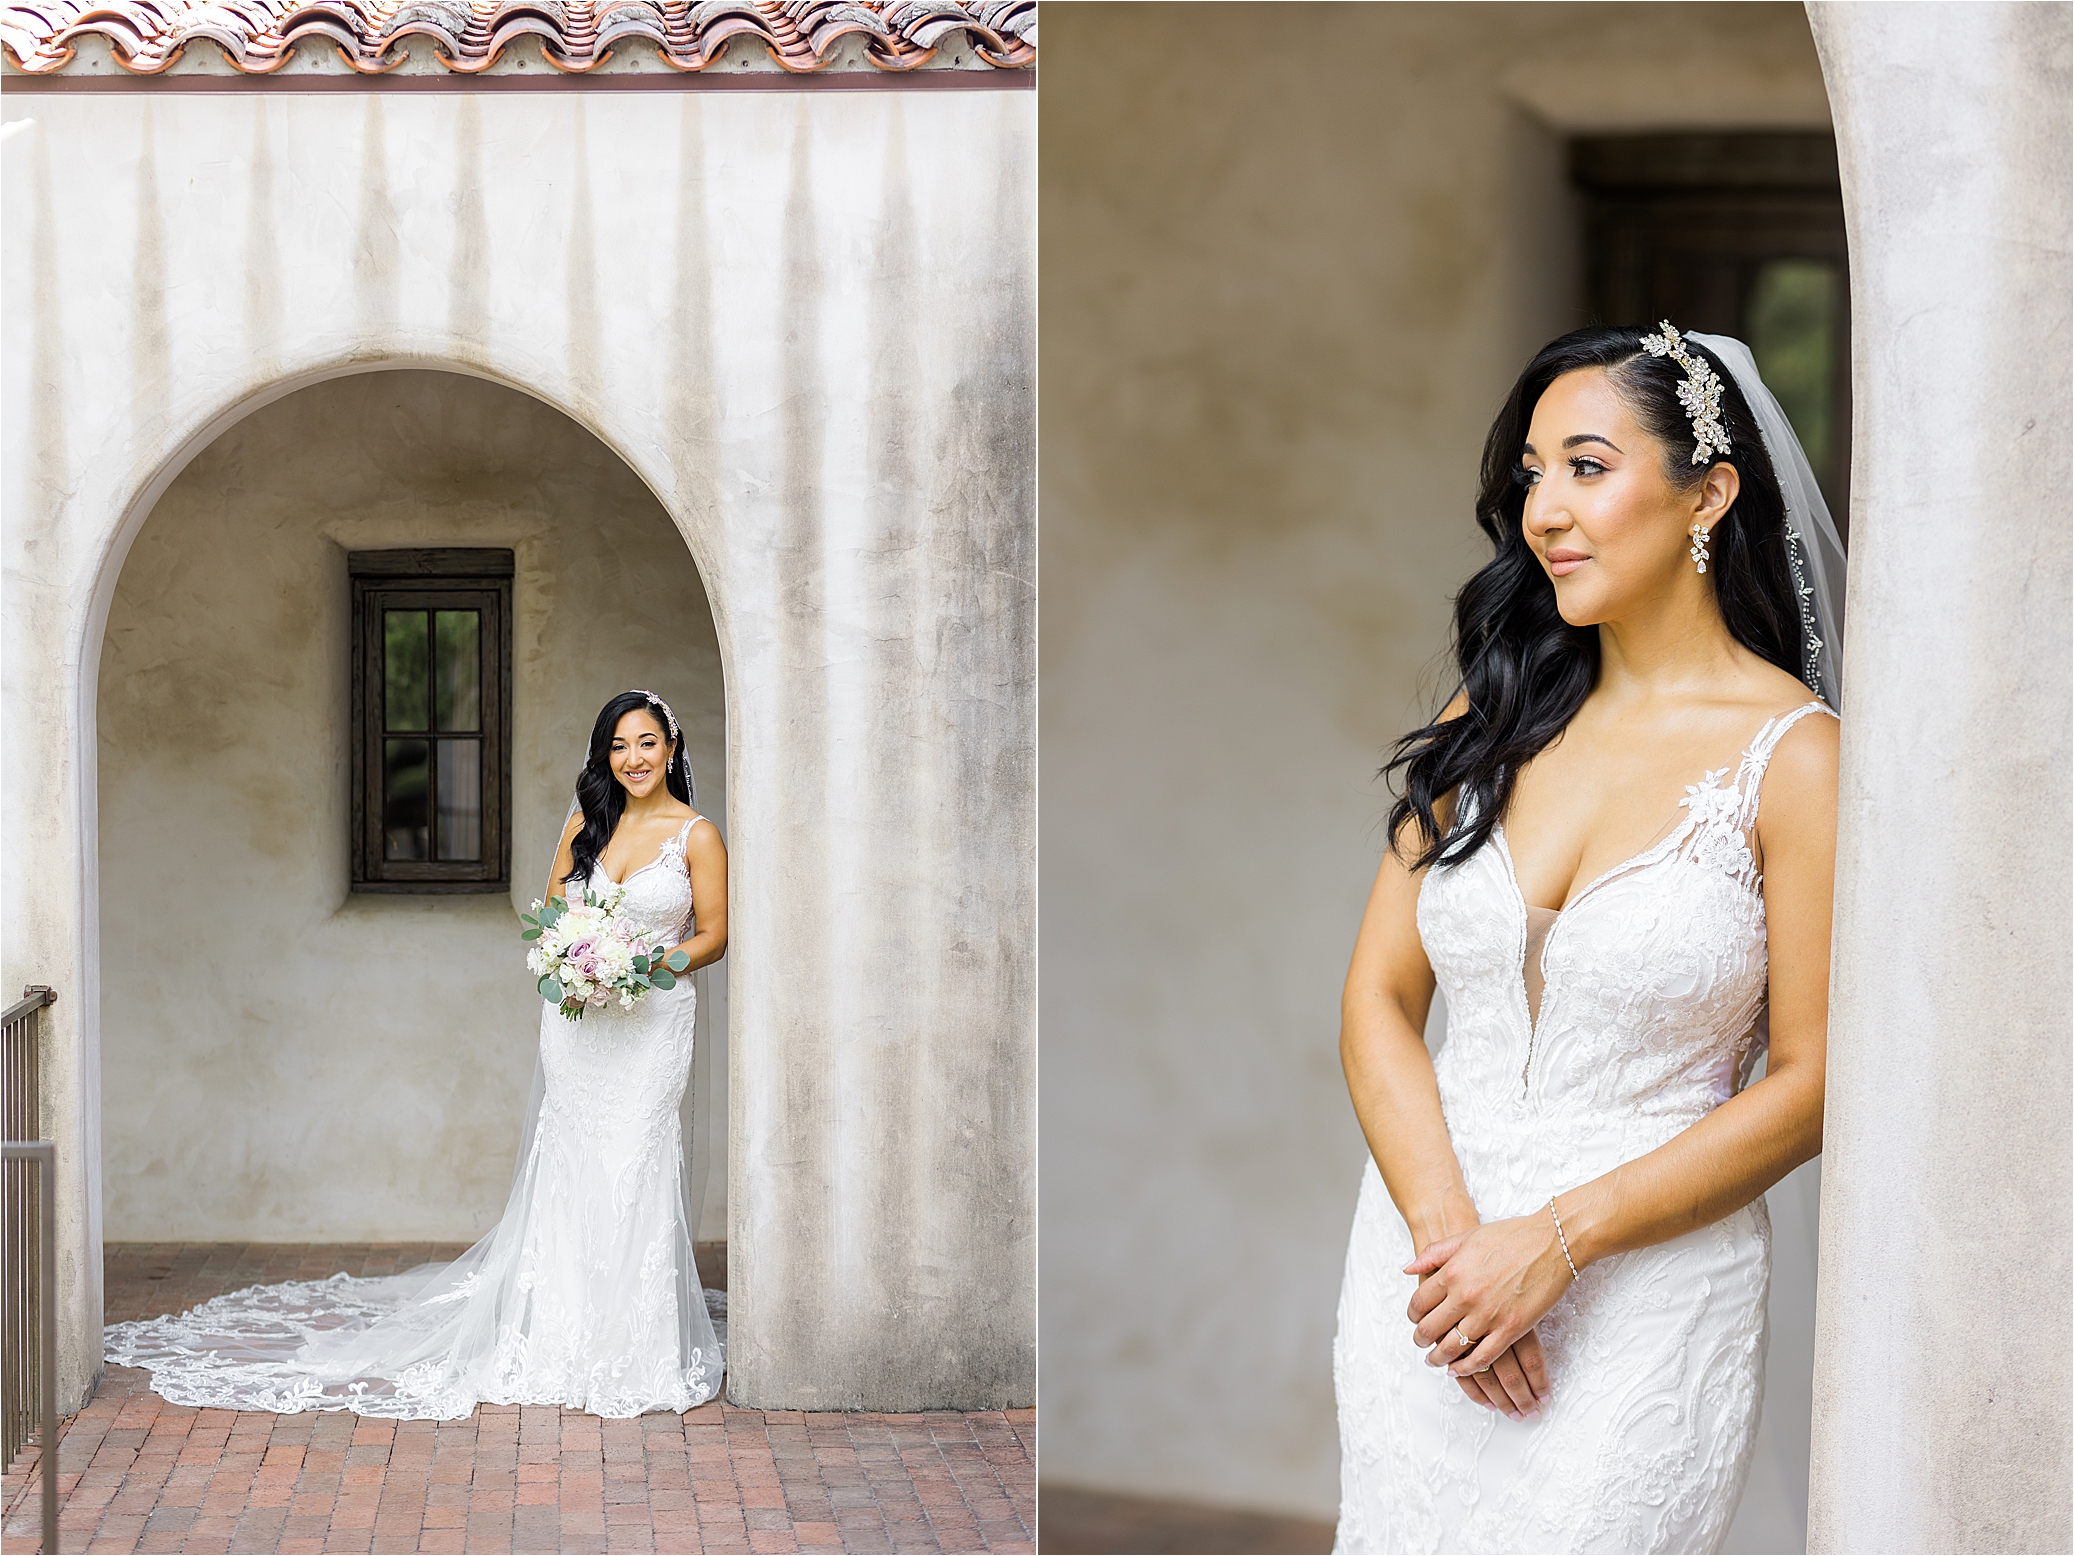 A dark haired bride crosses her hands and looks off to the side leaning on a wall at her mission venue in San Antonio, Texas